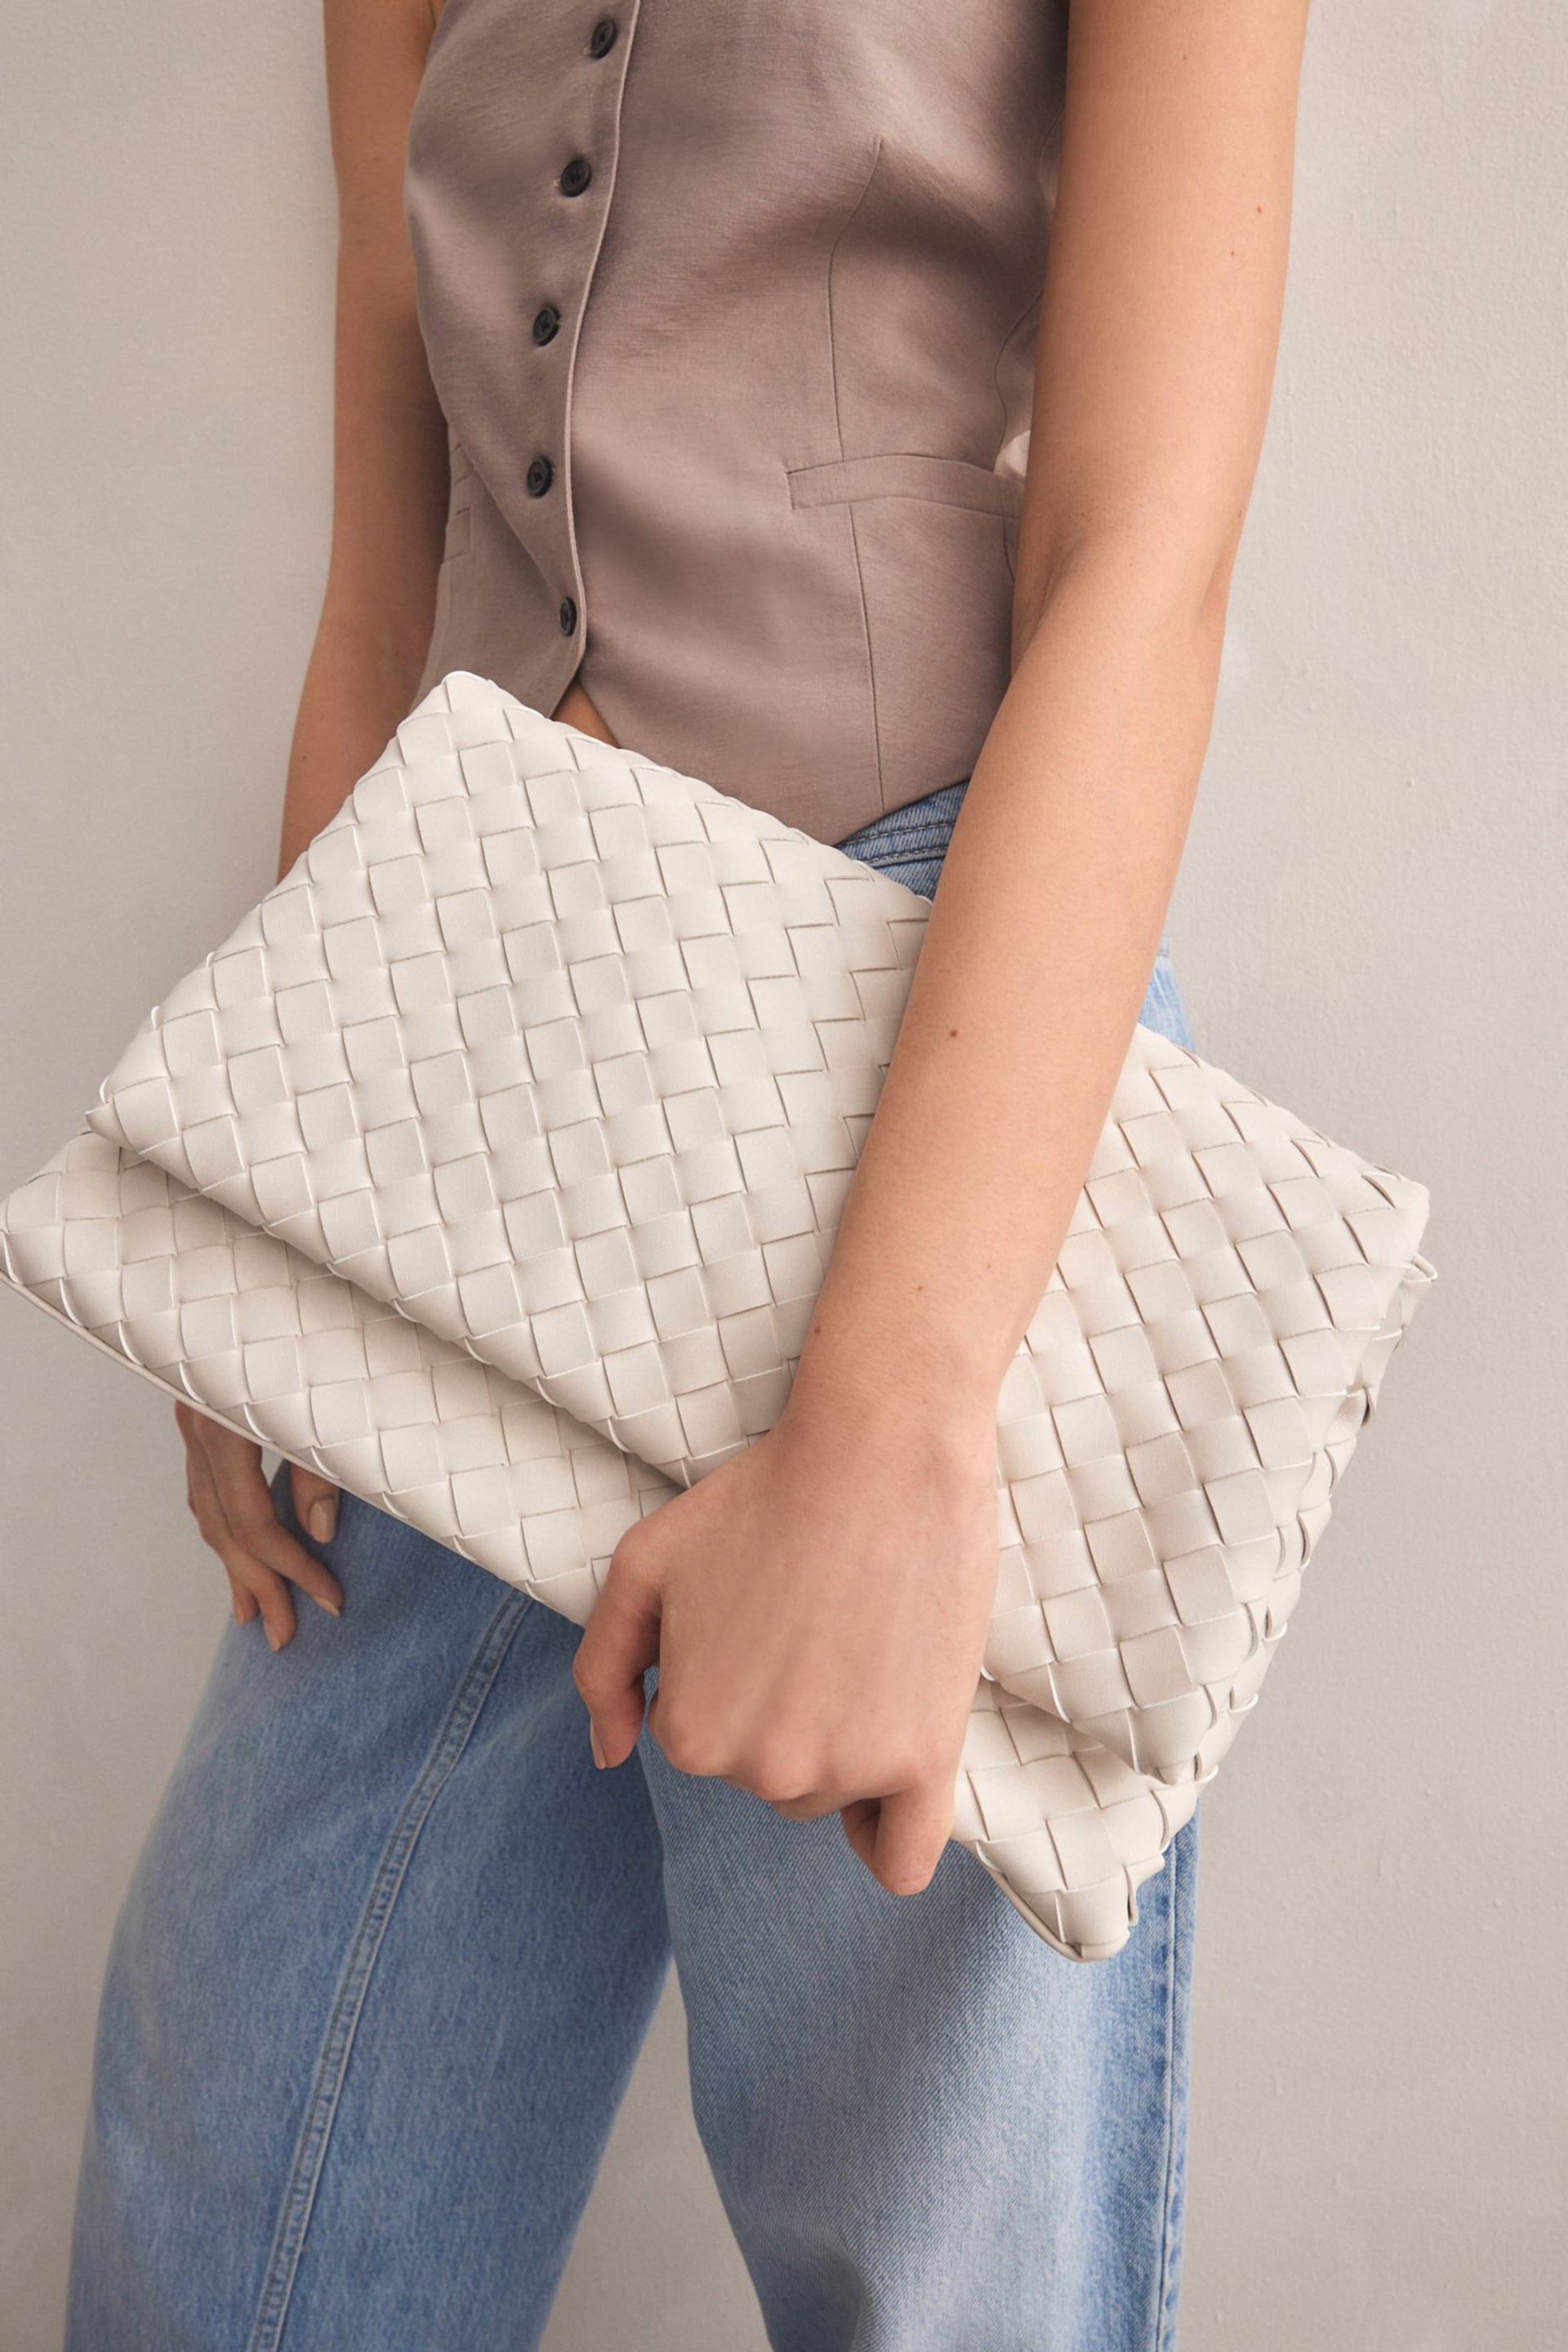 White Weave Clutch Bag - Image 3 of 9